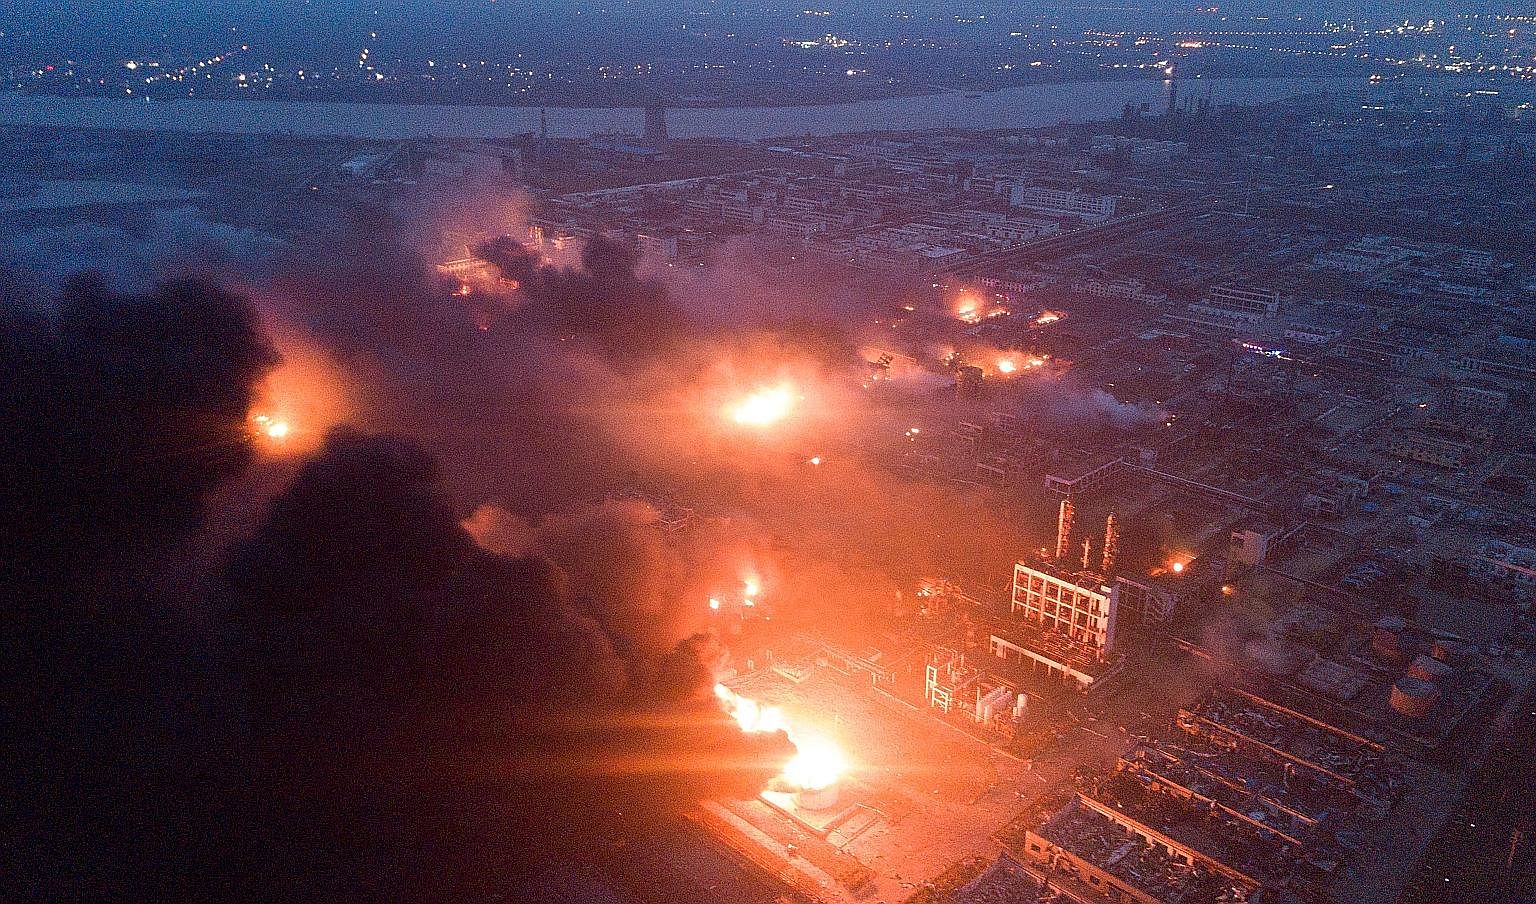 Smoke billowed from a fire at a chemical plant near Yancheng city, in China's eastern Jiangsu province, after a powerful explosion killed at least 62 people and injured 640 others on Thursday. The blast at the Jiangsu Tianjiayi Chemical Company in th